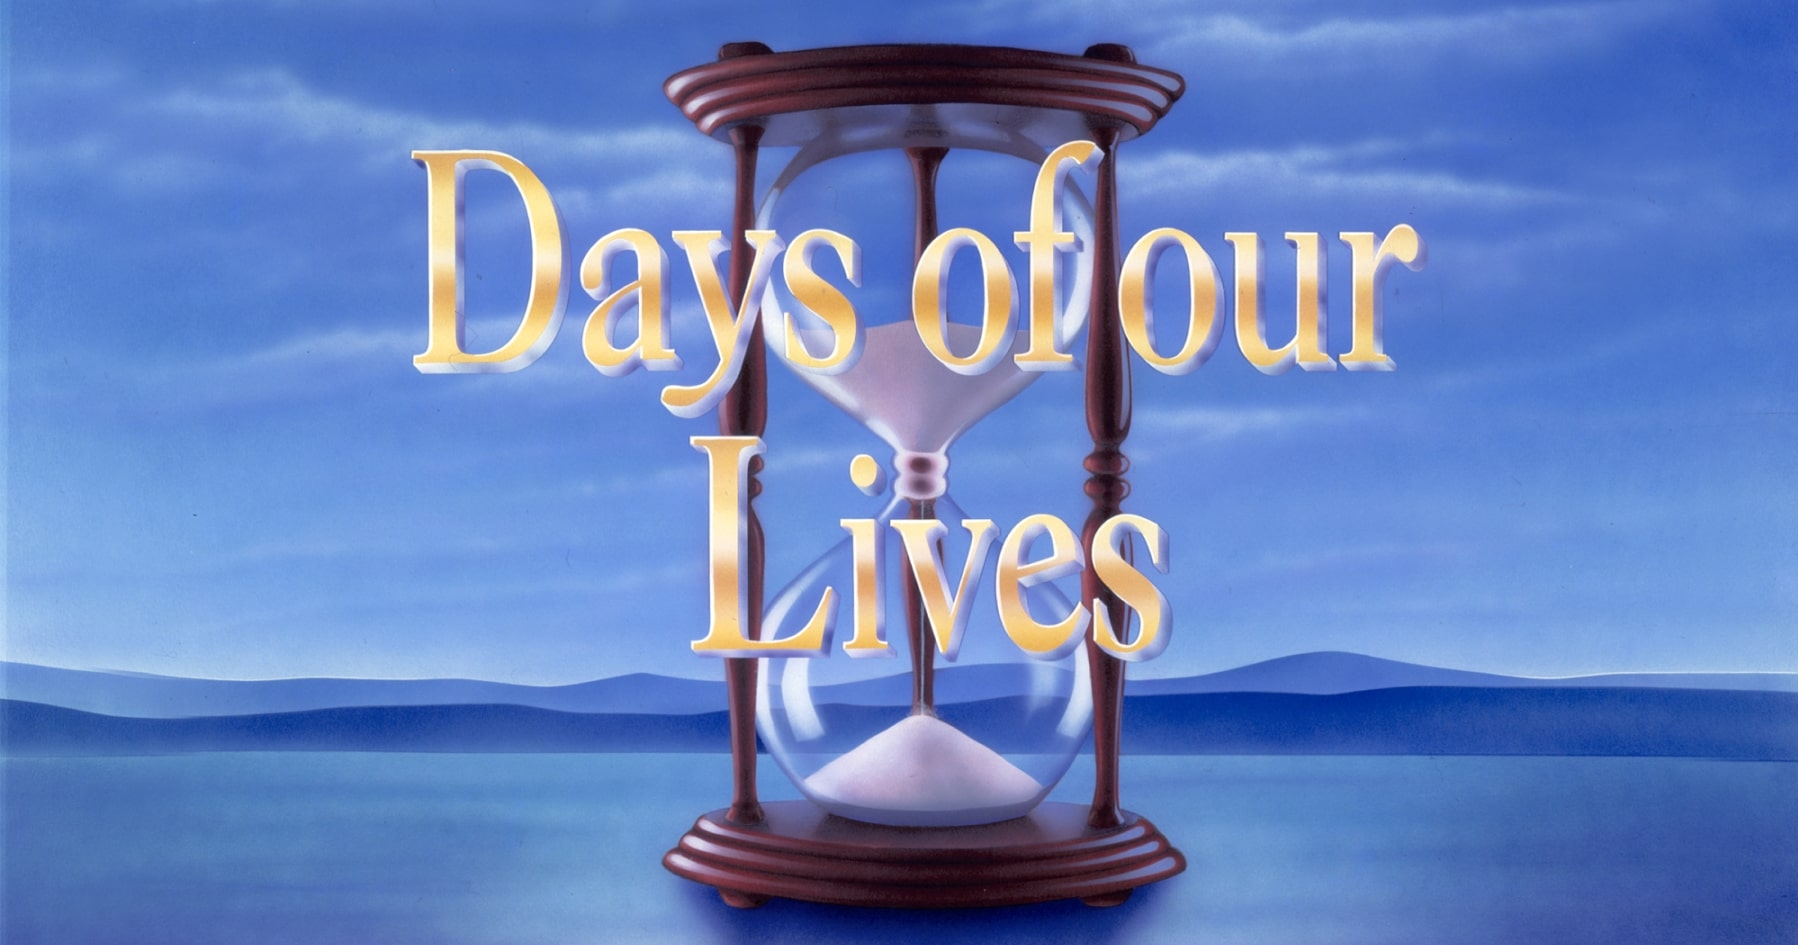 Days of Our Lives is moving to Peacock, ending a 57-year run